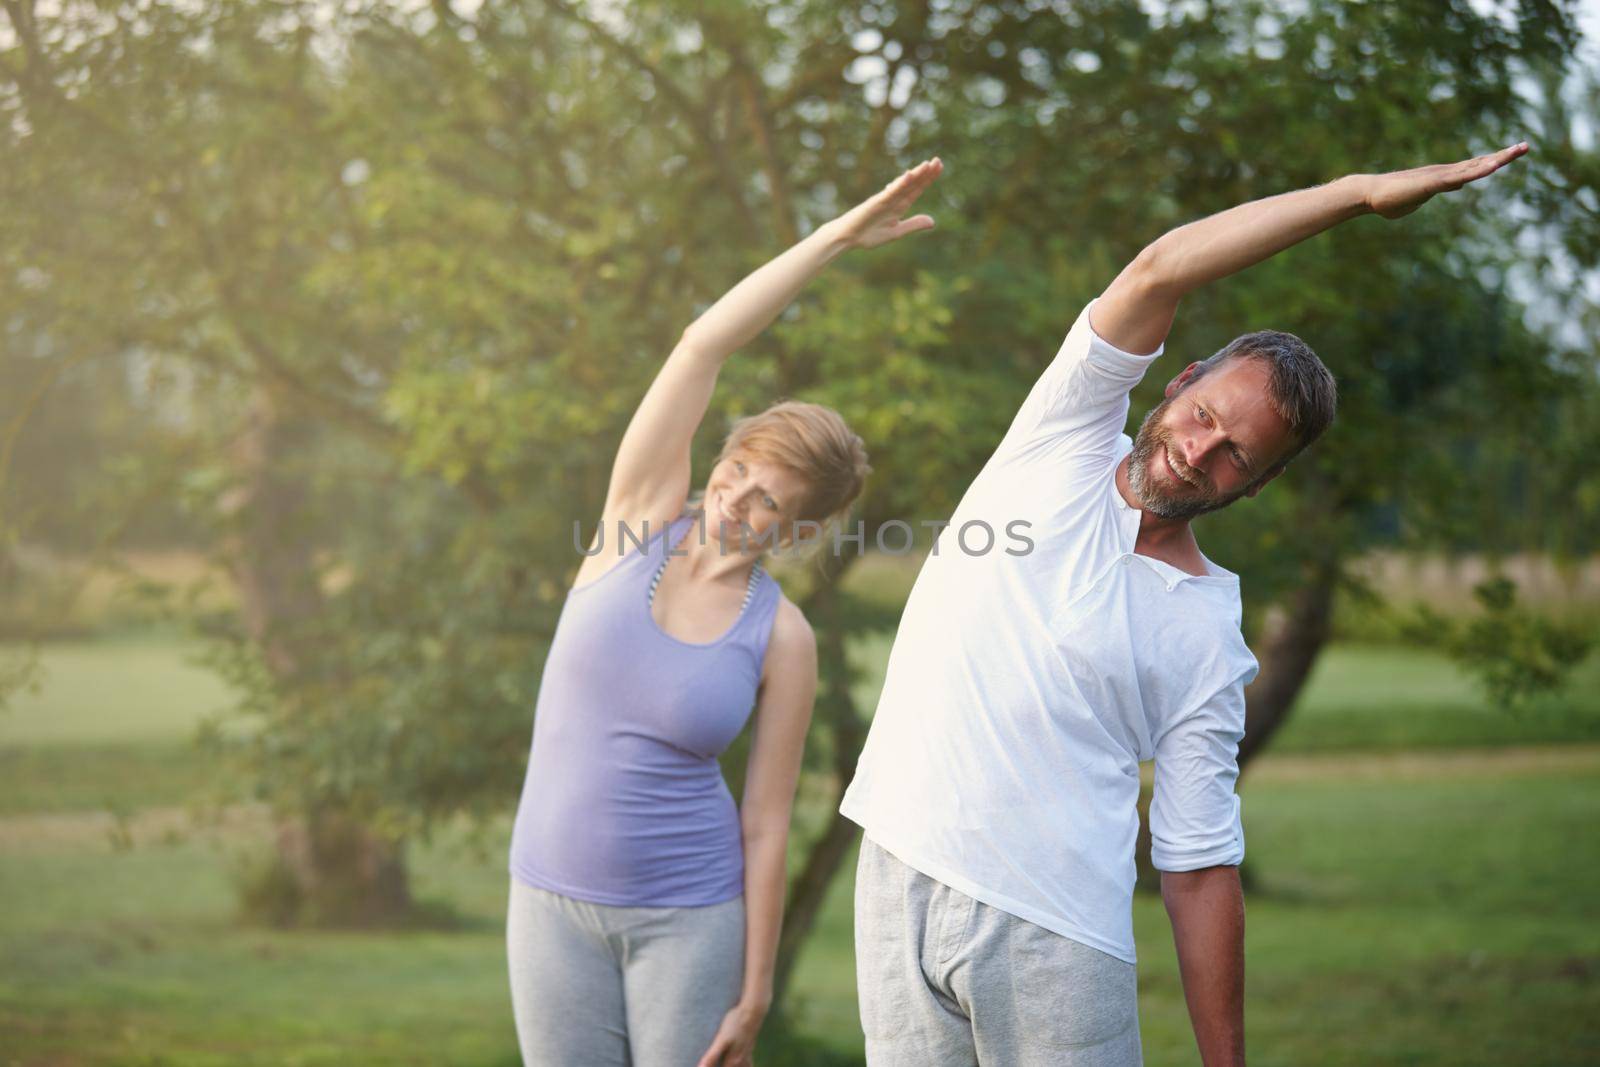 Their workout of choice. a happy mature couple doing yoga in nature